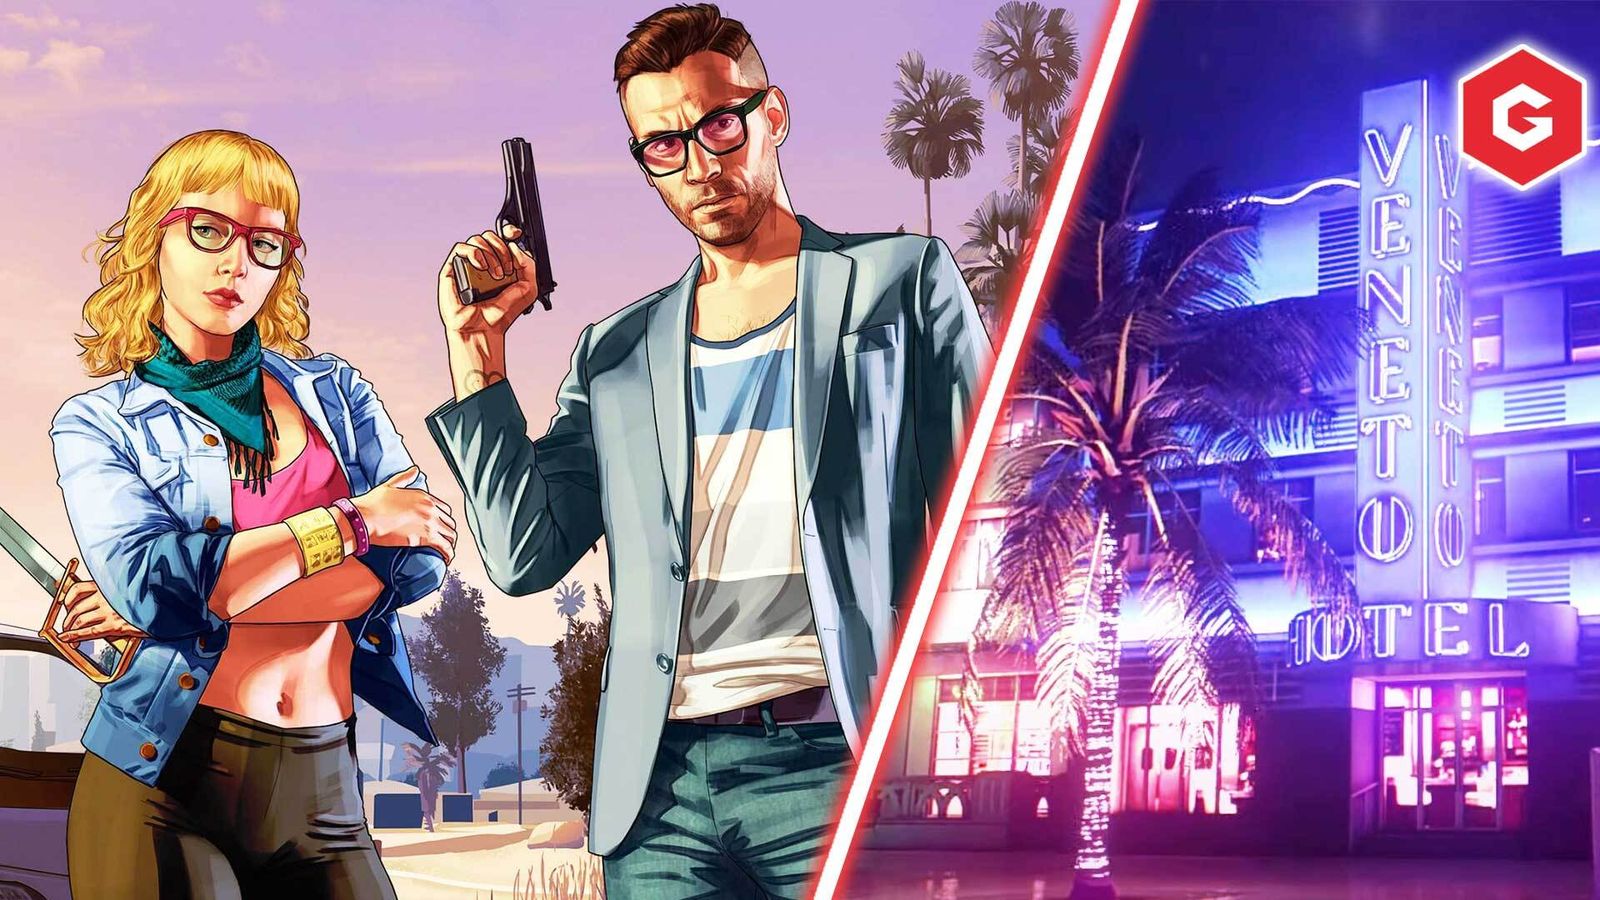 A promo image for GTA Online.